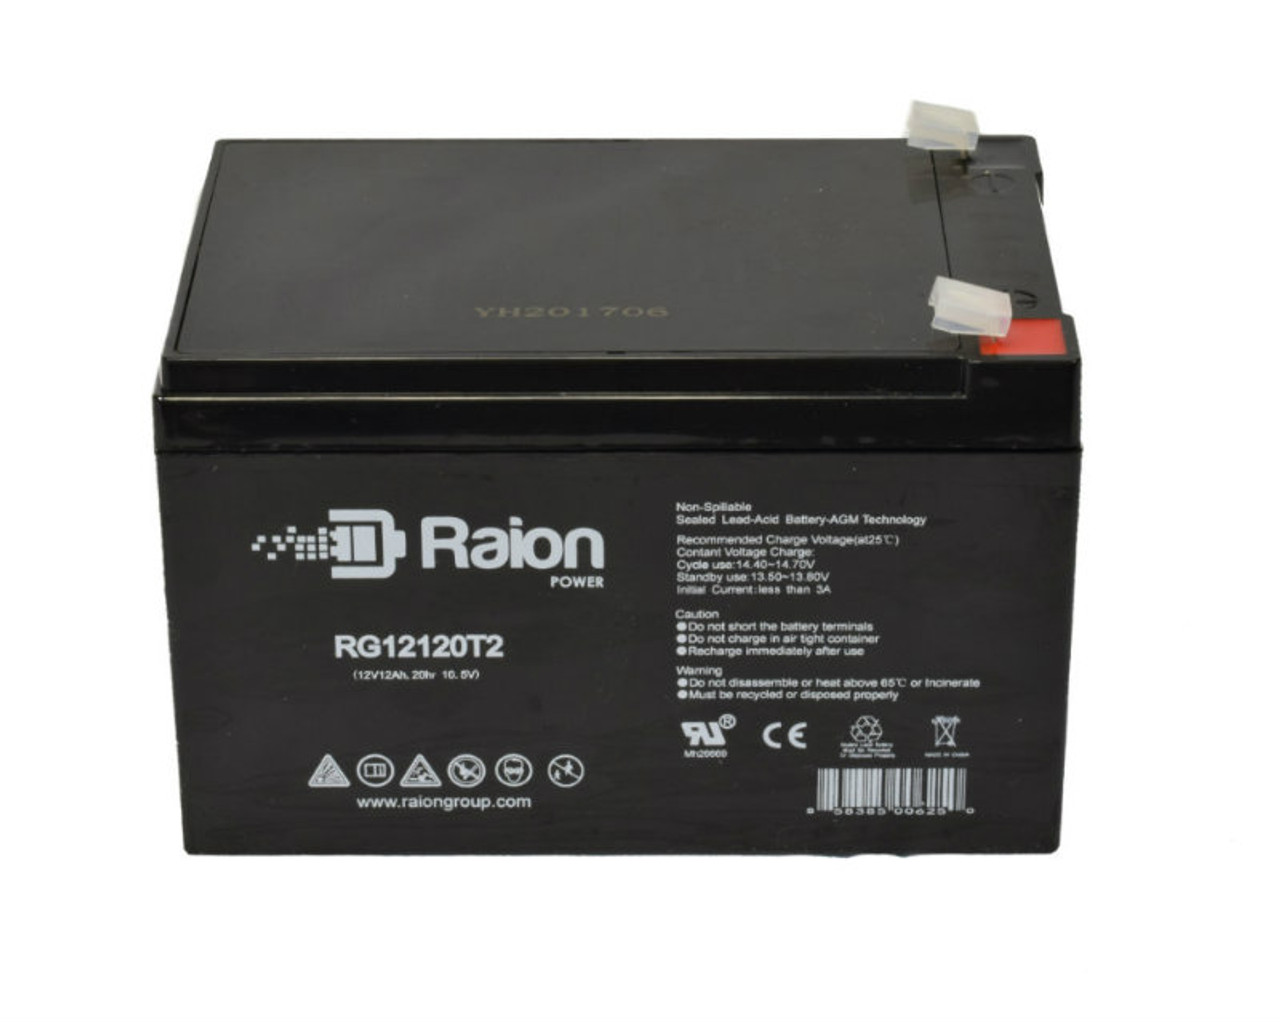 Raion Power RG12120T2 SLA Battery for Pride Mobility Go-Go Ultra X - 4 wheel scooter Wheelchairs